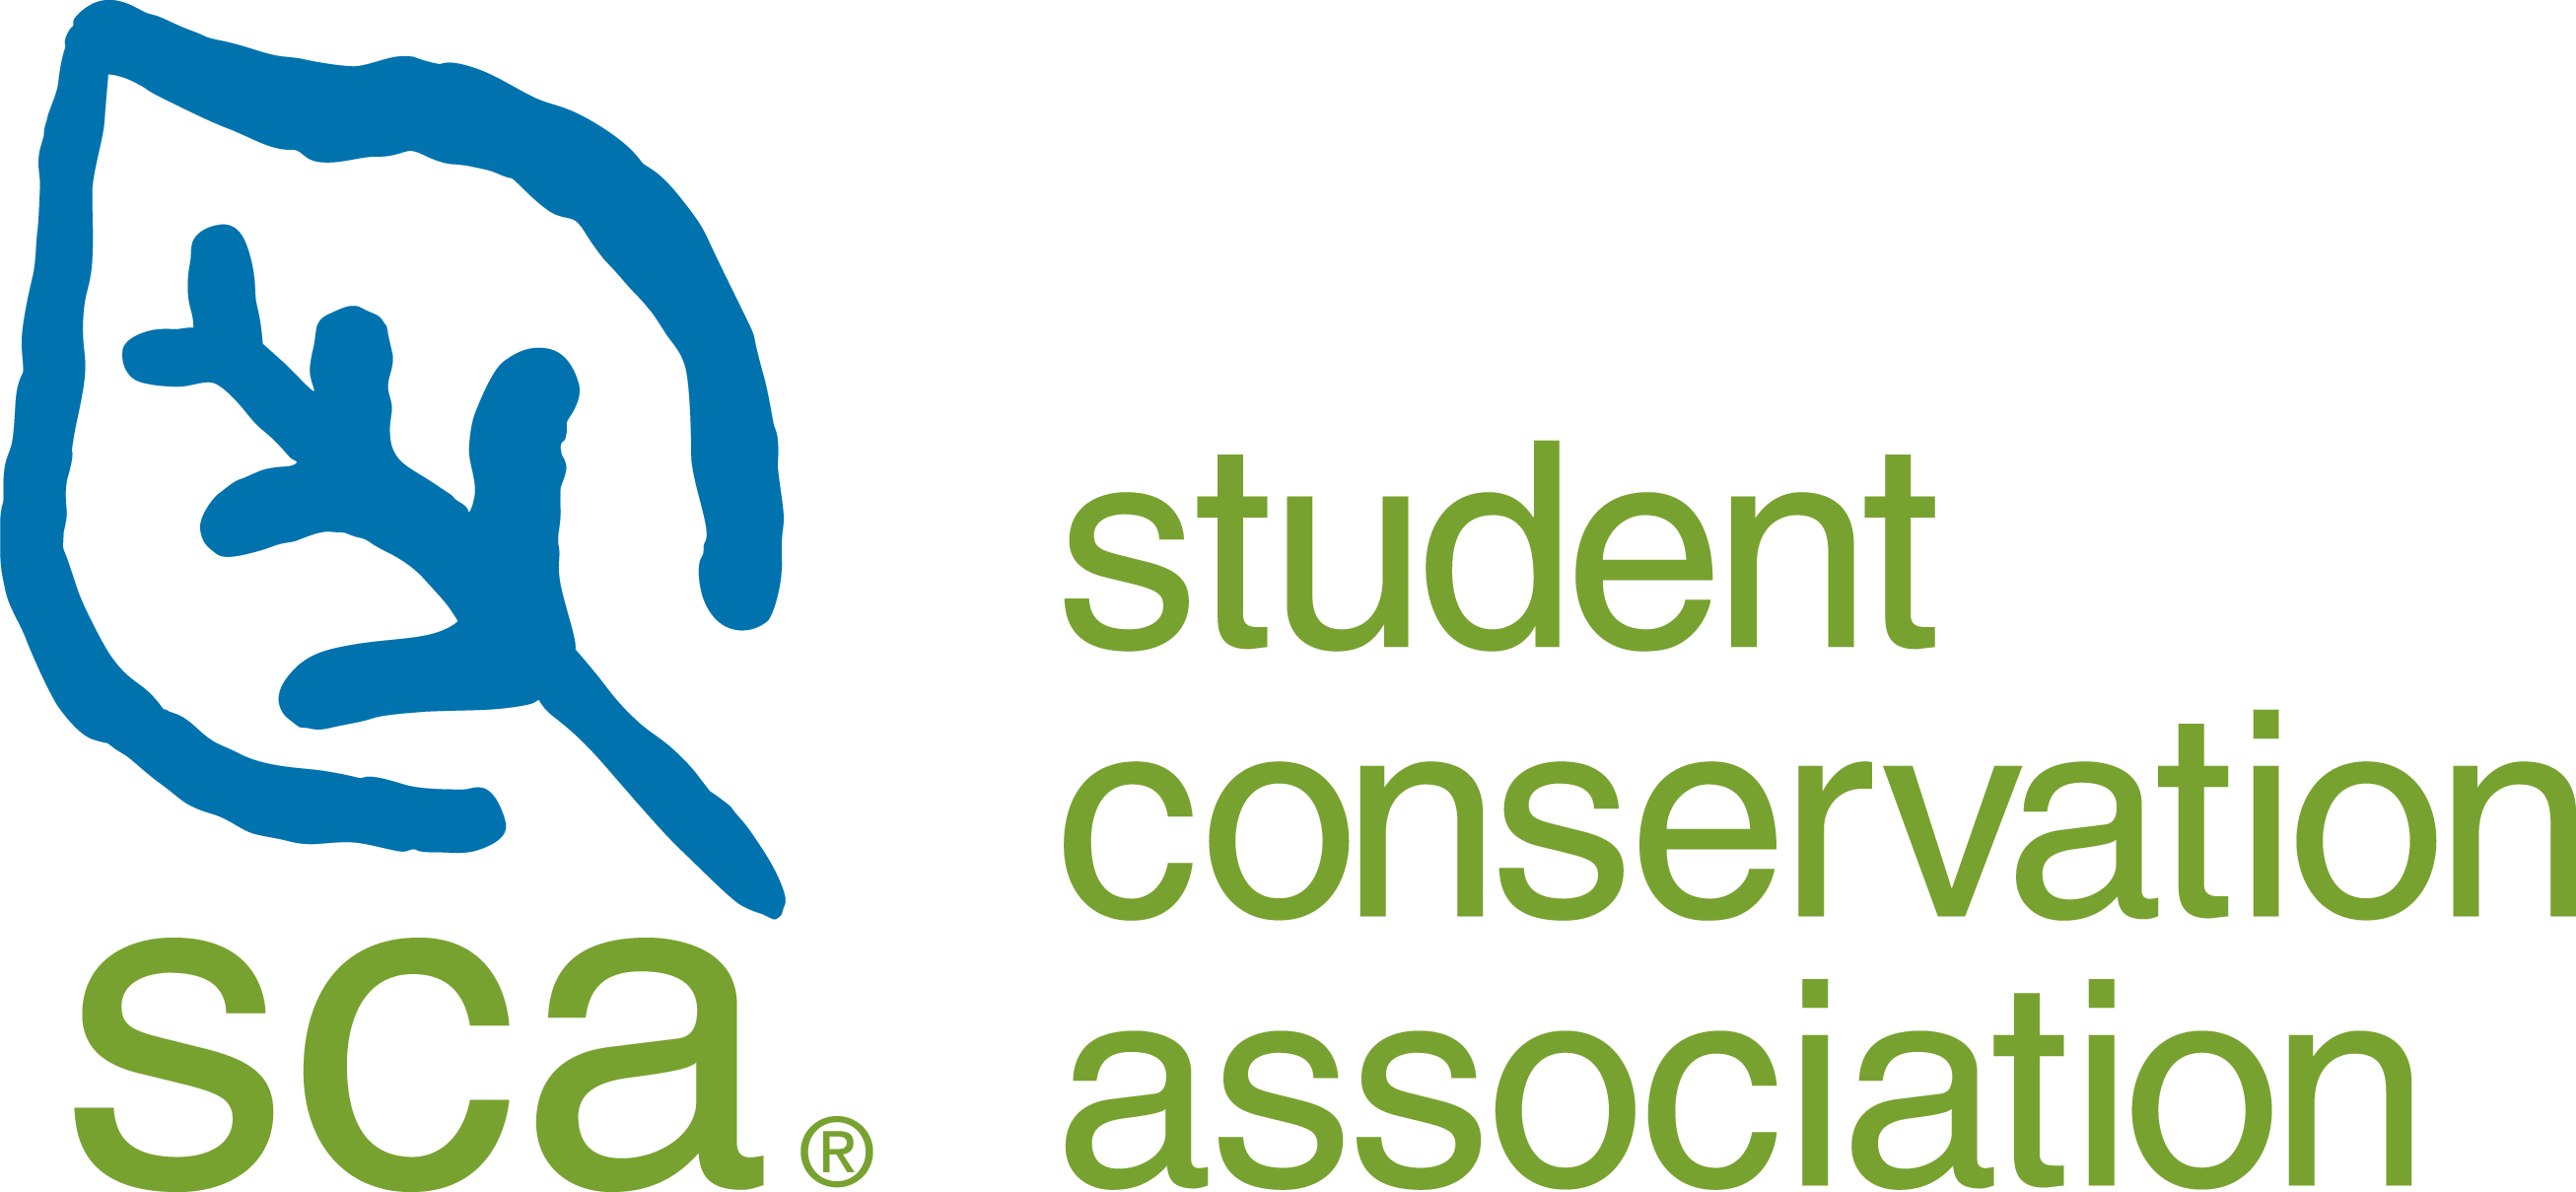 A logo with the words Student Conservation Association and a graphic of a leaf with SCA below it.